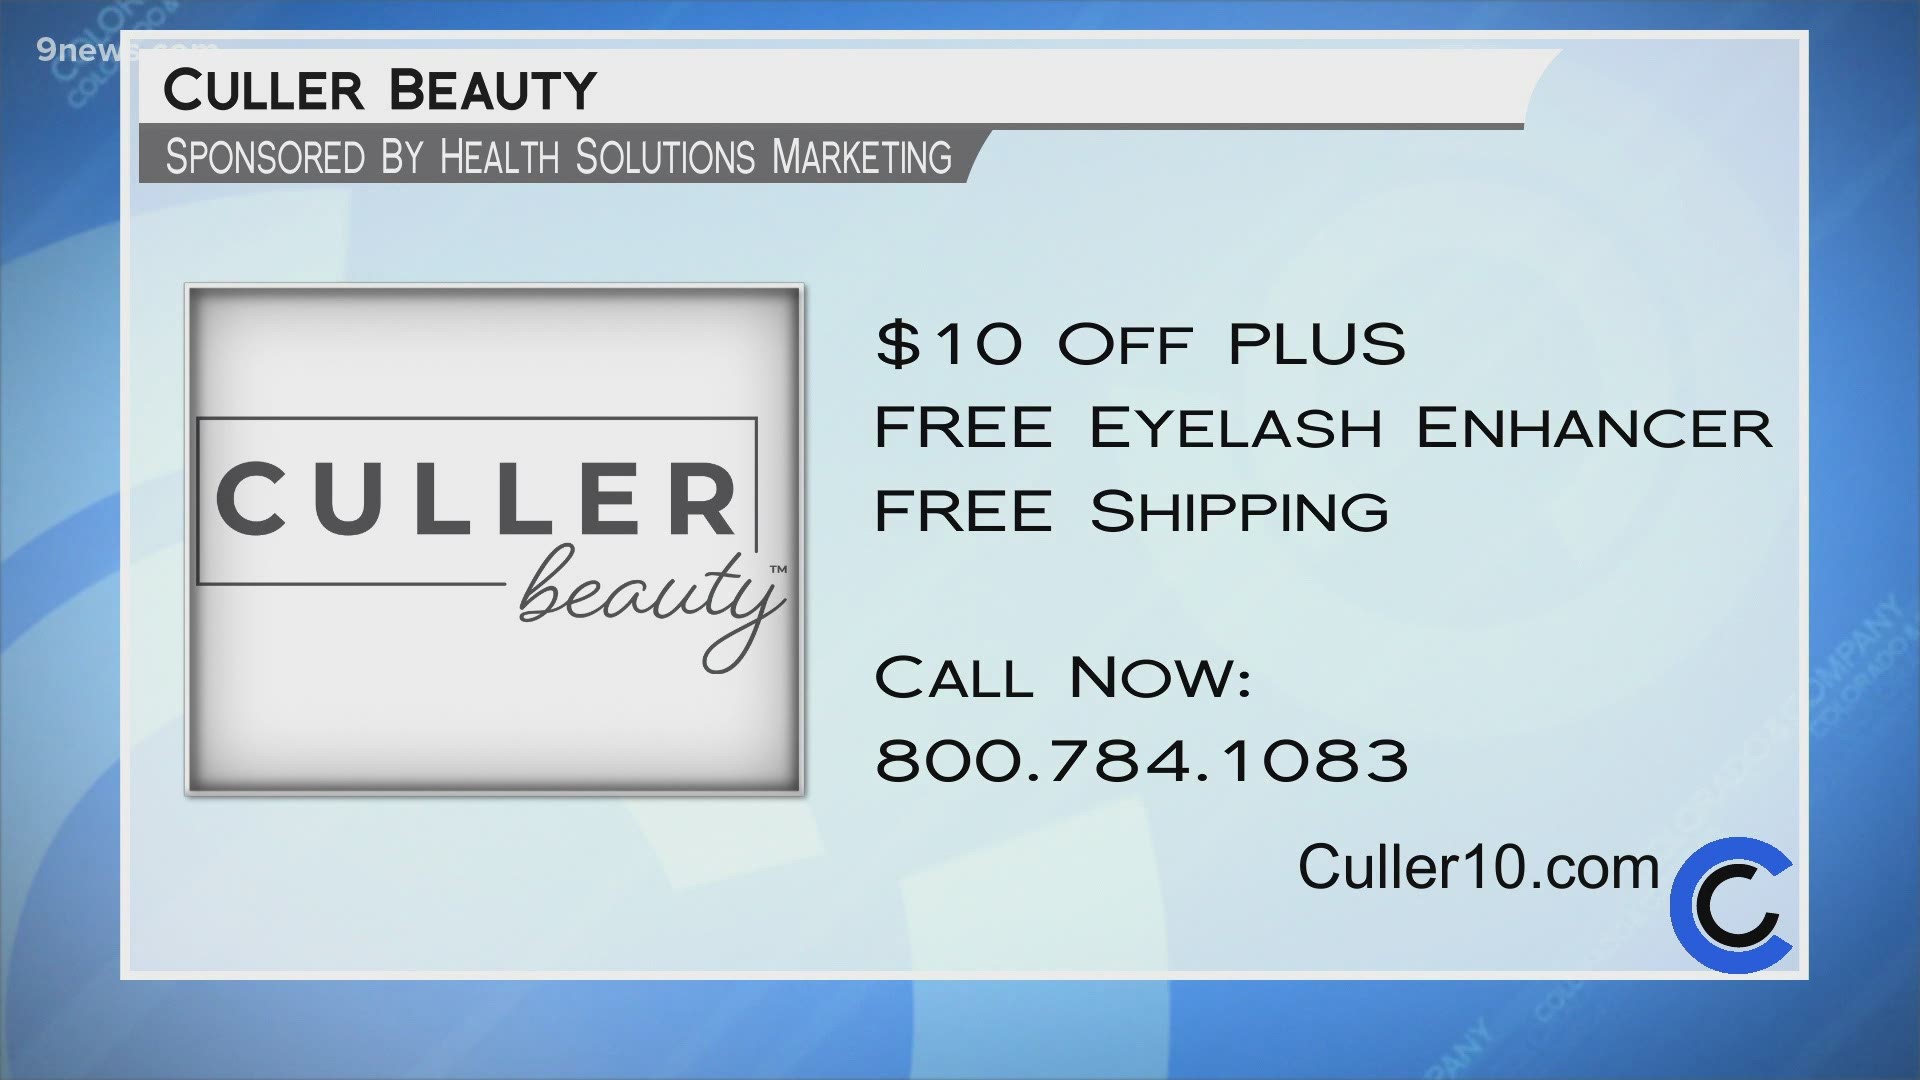 Visit Culler10.com or call 1.800.784.1083 to get $10 off! You'll also get a free eye lash enhancer and free shipping with your order.